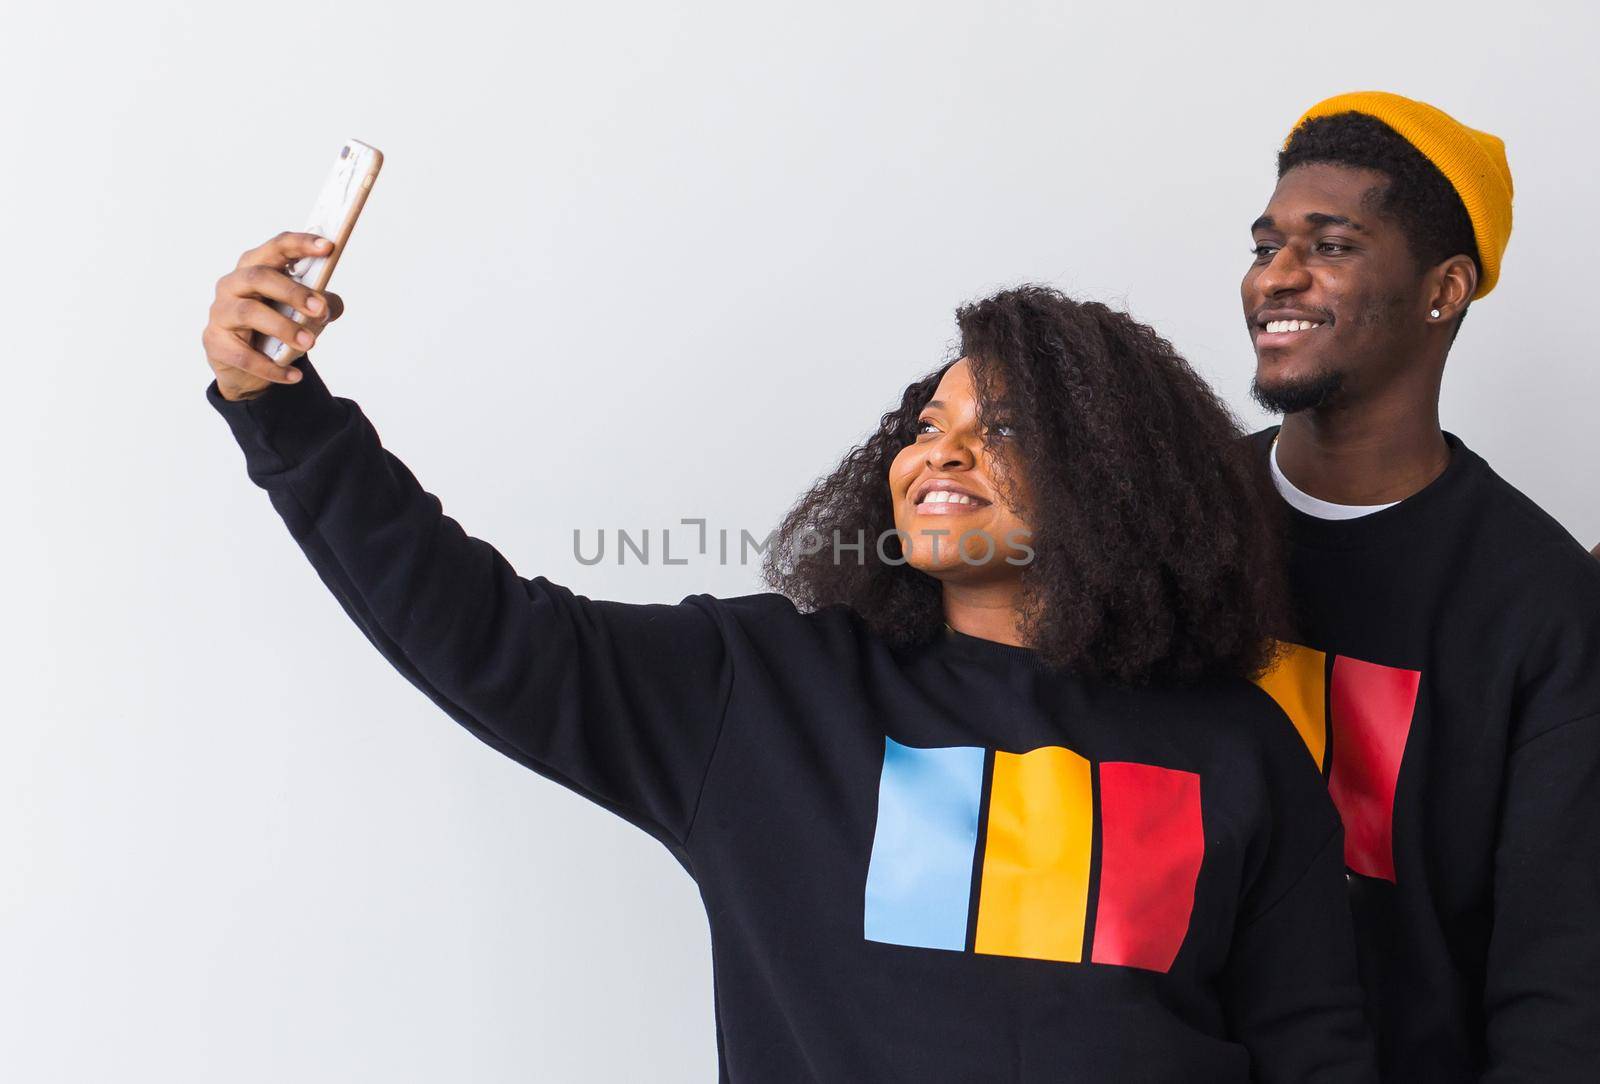 Friendship and fun concept - Group of friends afro american men and woman taking selfie in studio on white background